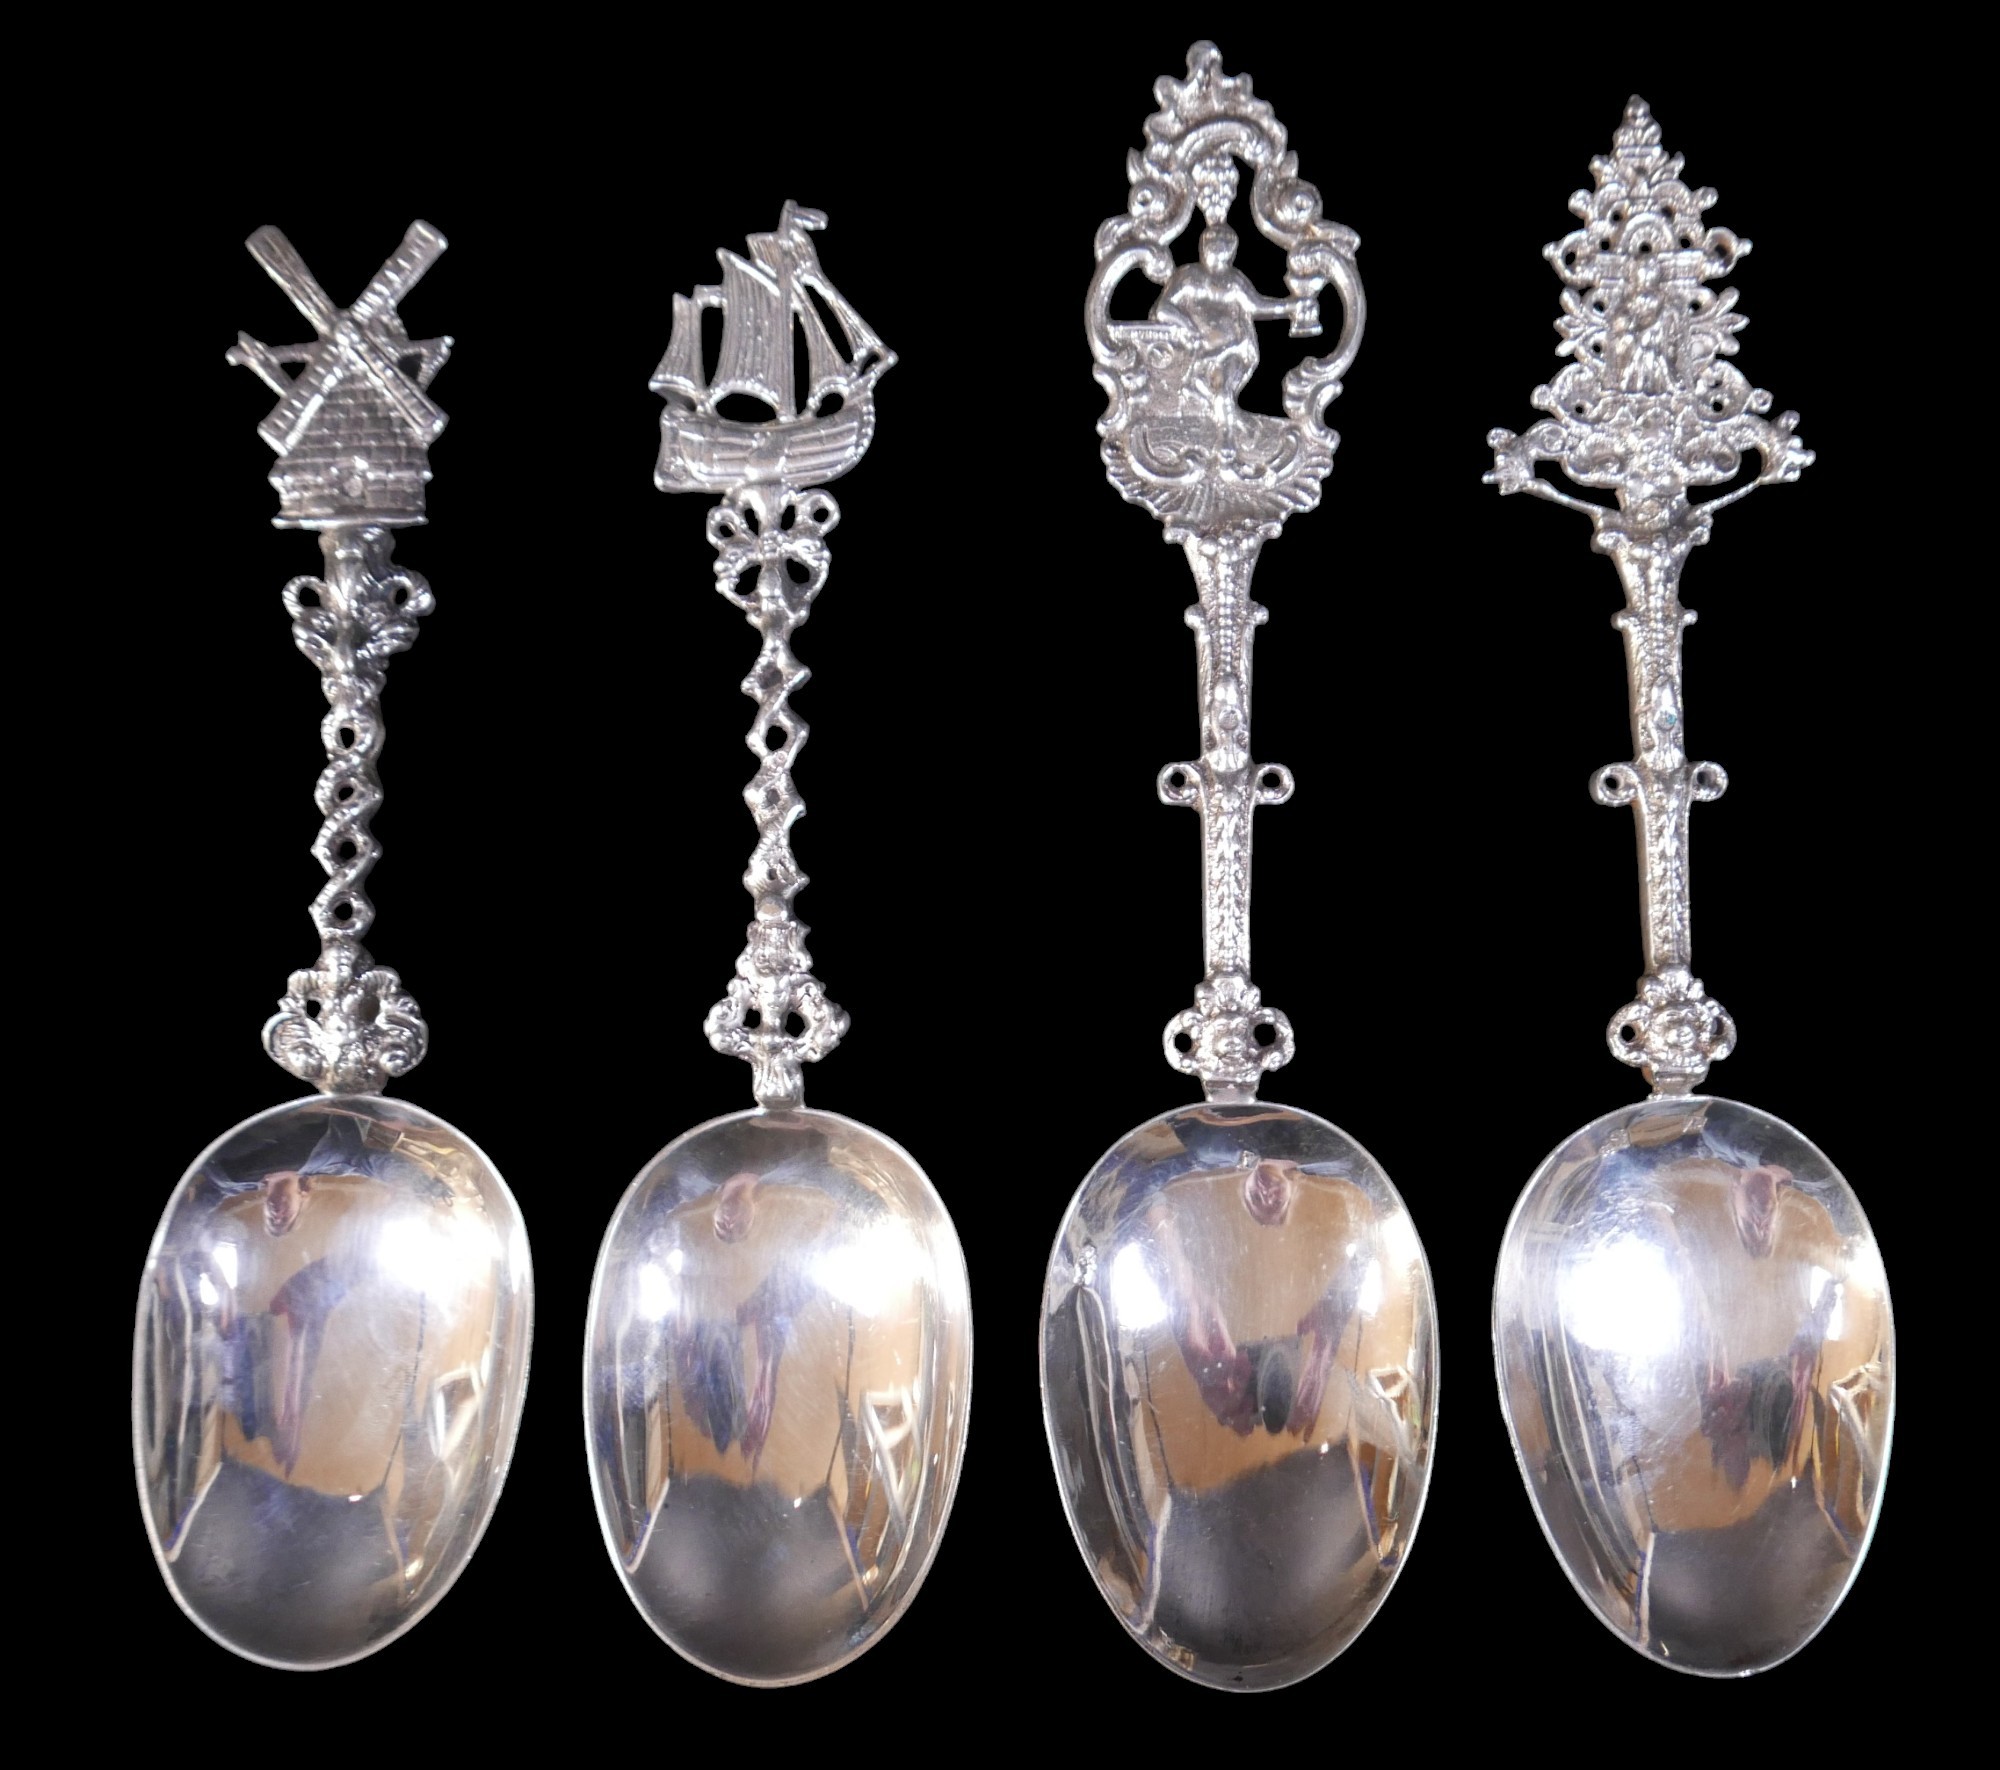 Four Dutch silver spoons with decorative finials (possibly earlier bowls with later handles) with